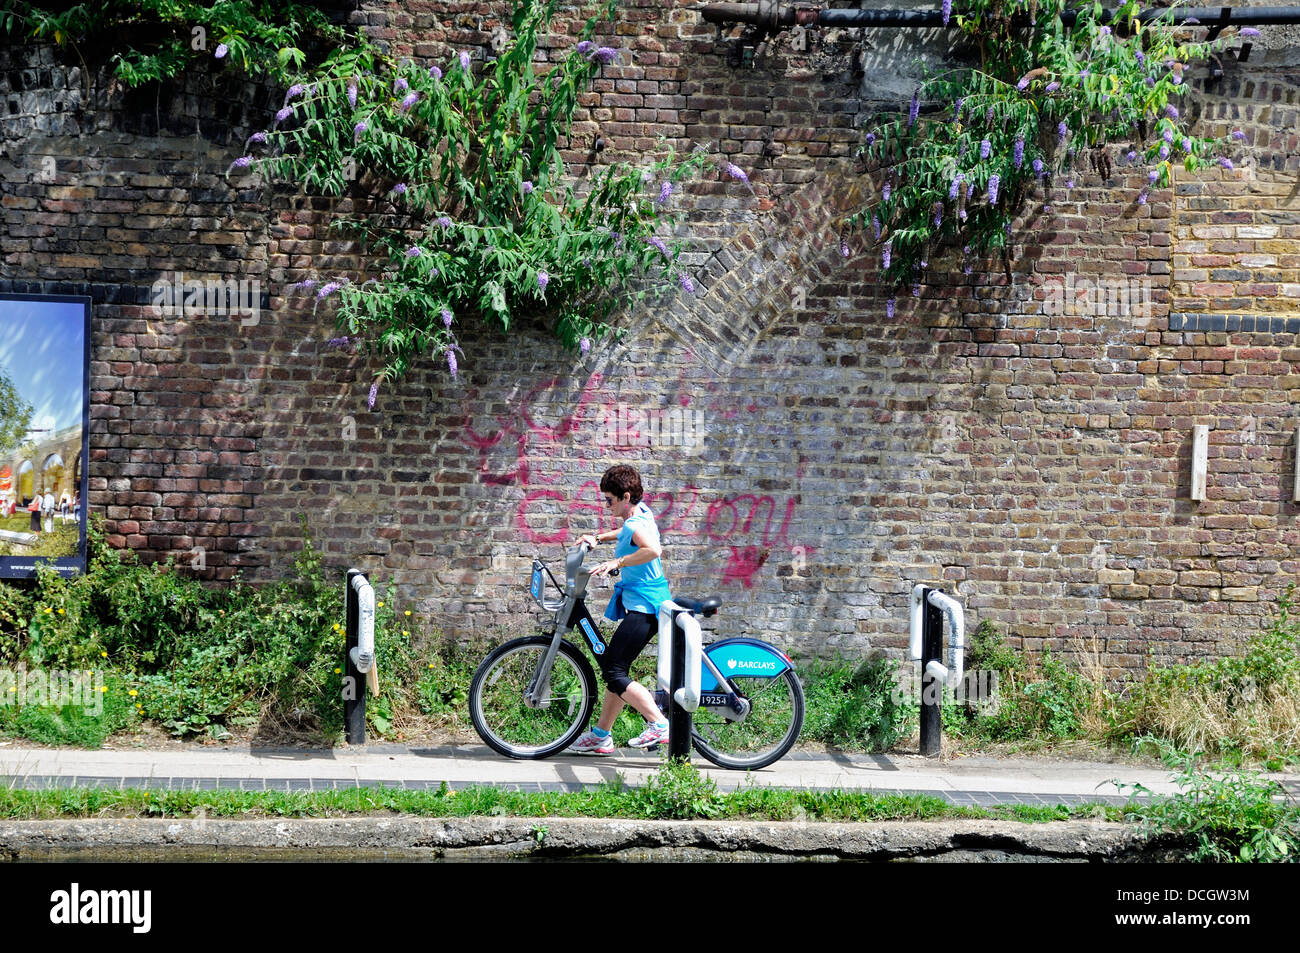 Female cyclist on Barclays Cycle or Boris Bike negotiating chicane installed on the Regent's Canal towpath to slow down cyclists Stock Photo